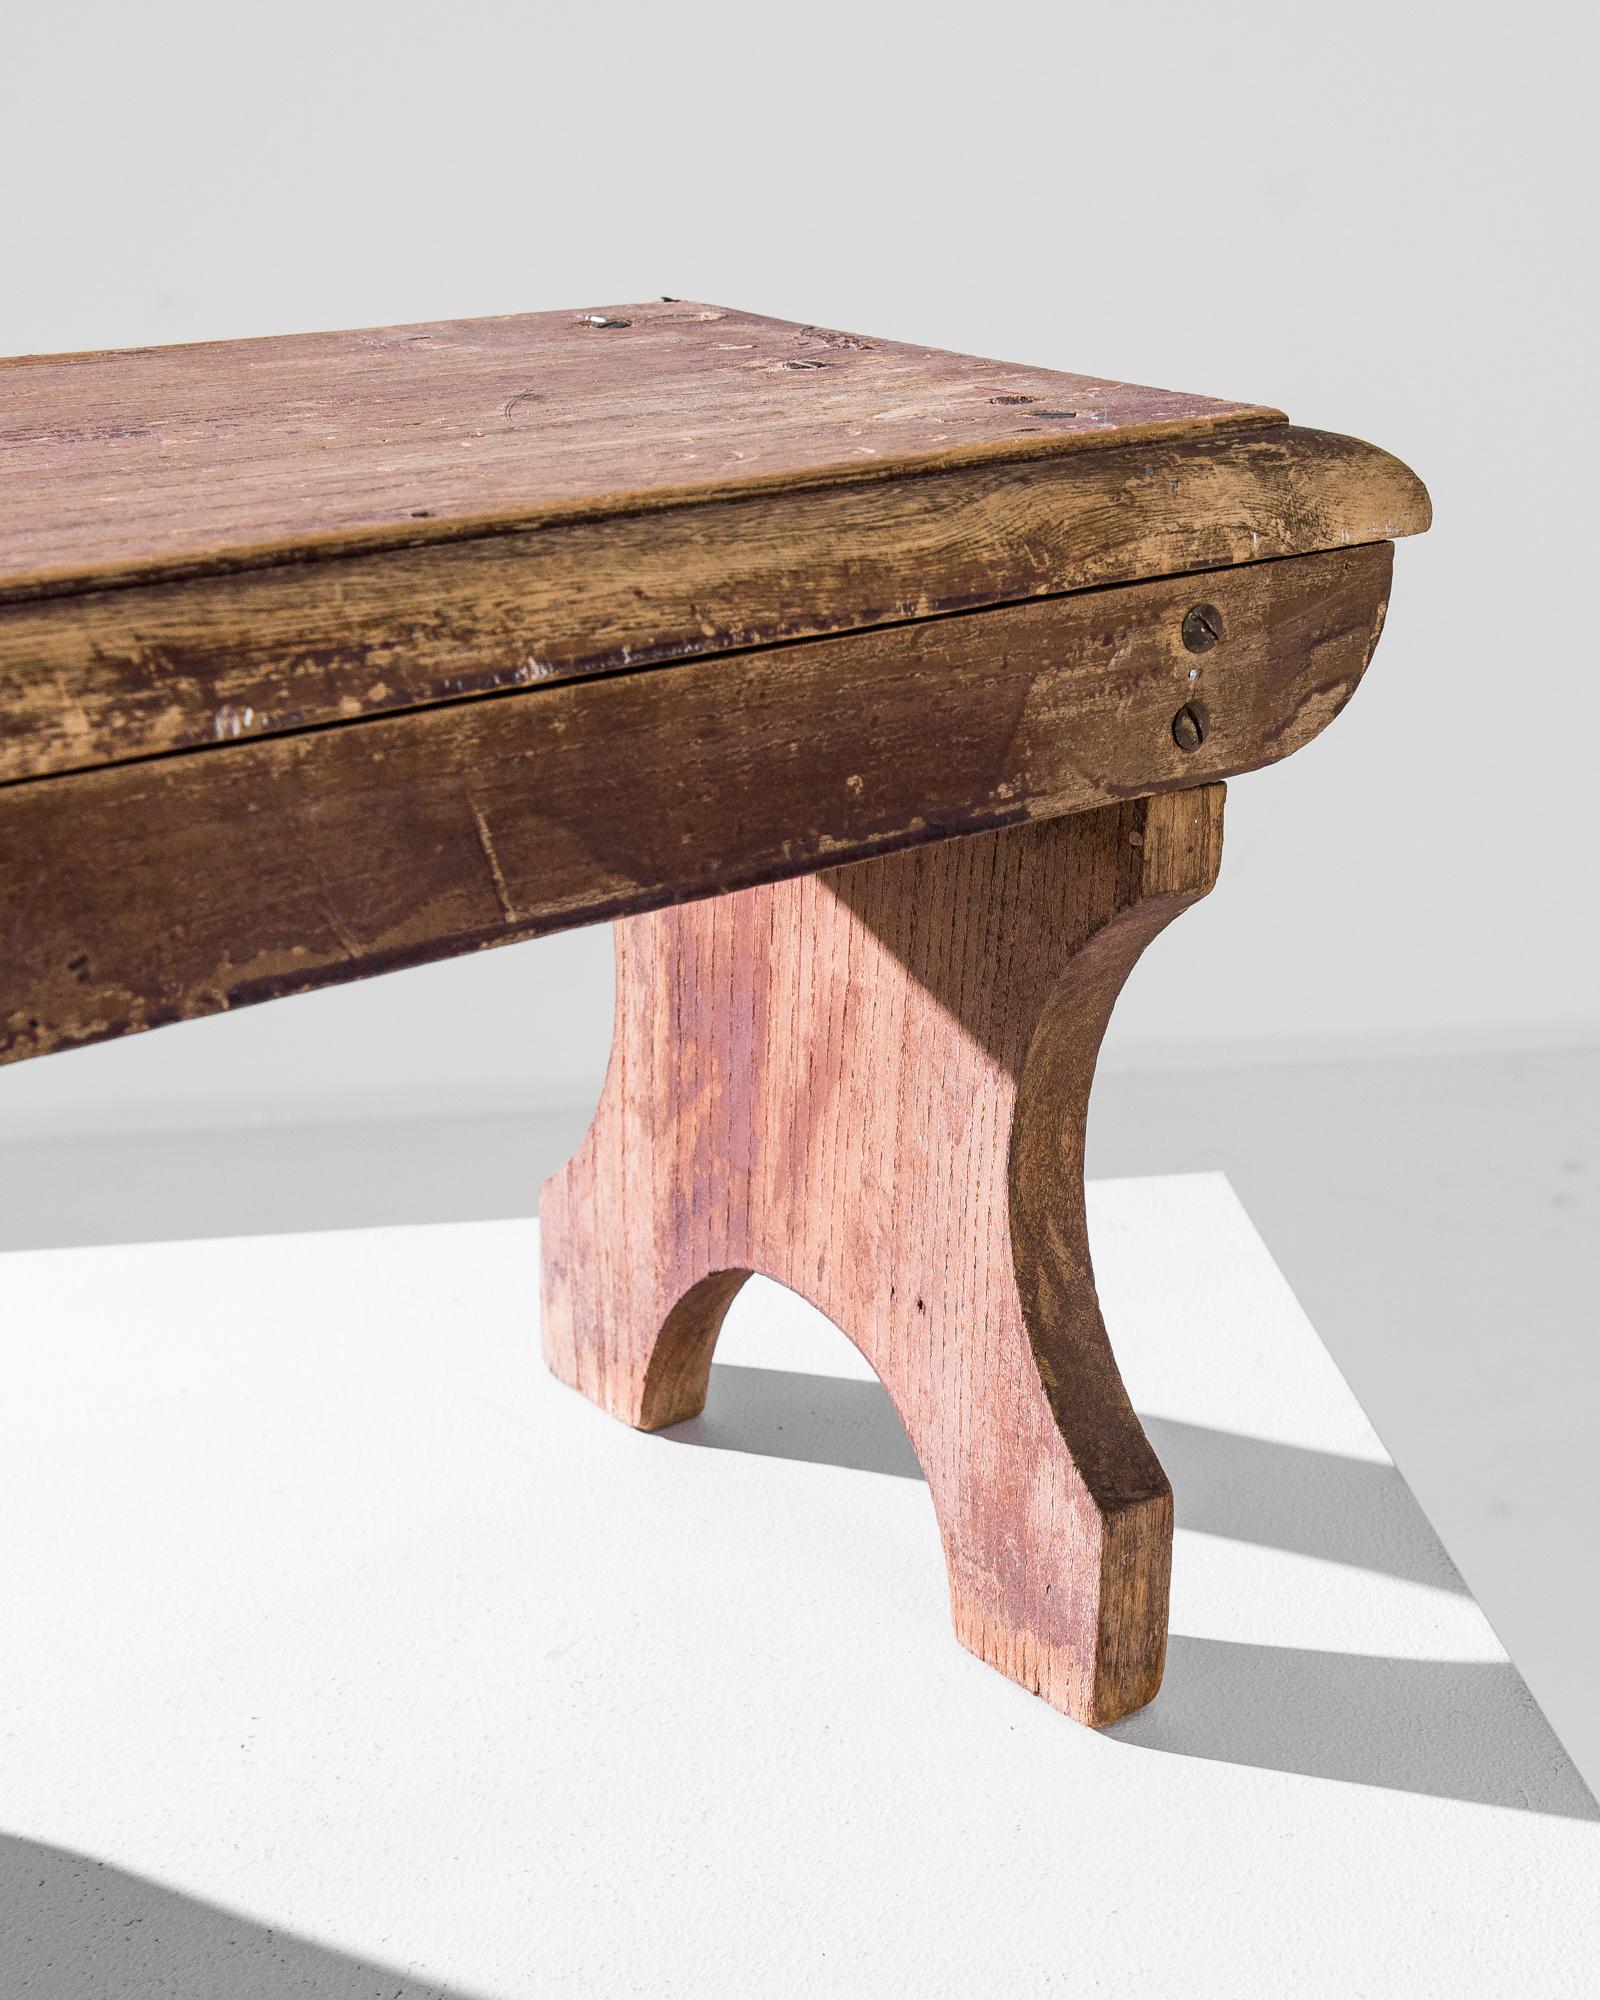 A wooden stool from France, produced circa 1900. A small stool for sedentary soloists. With a silhouette that looks like this antique was lifted from an old cathedral, this stool is the first step of a spiritual quest: feet planted, eyes closed,